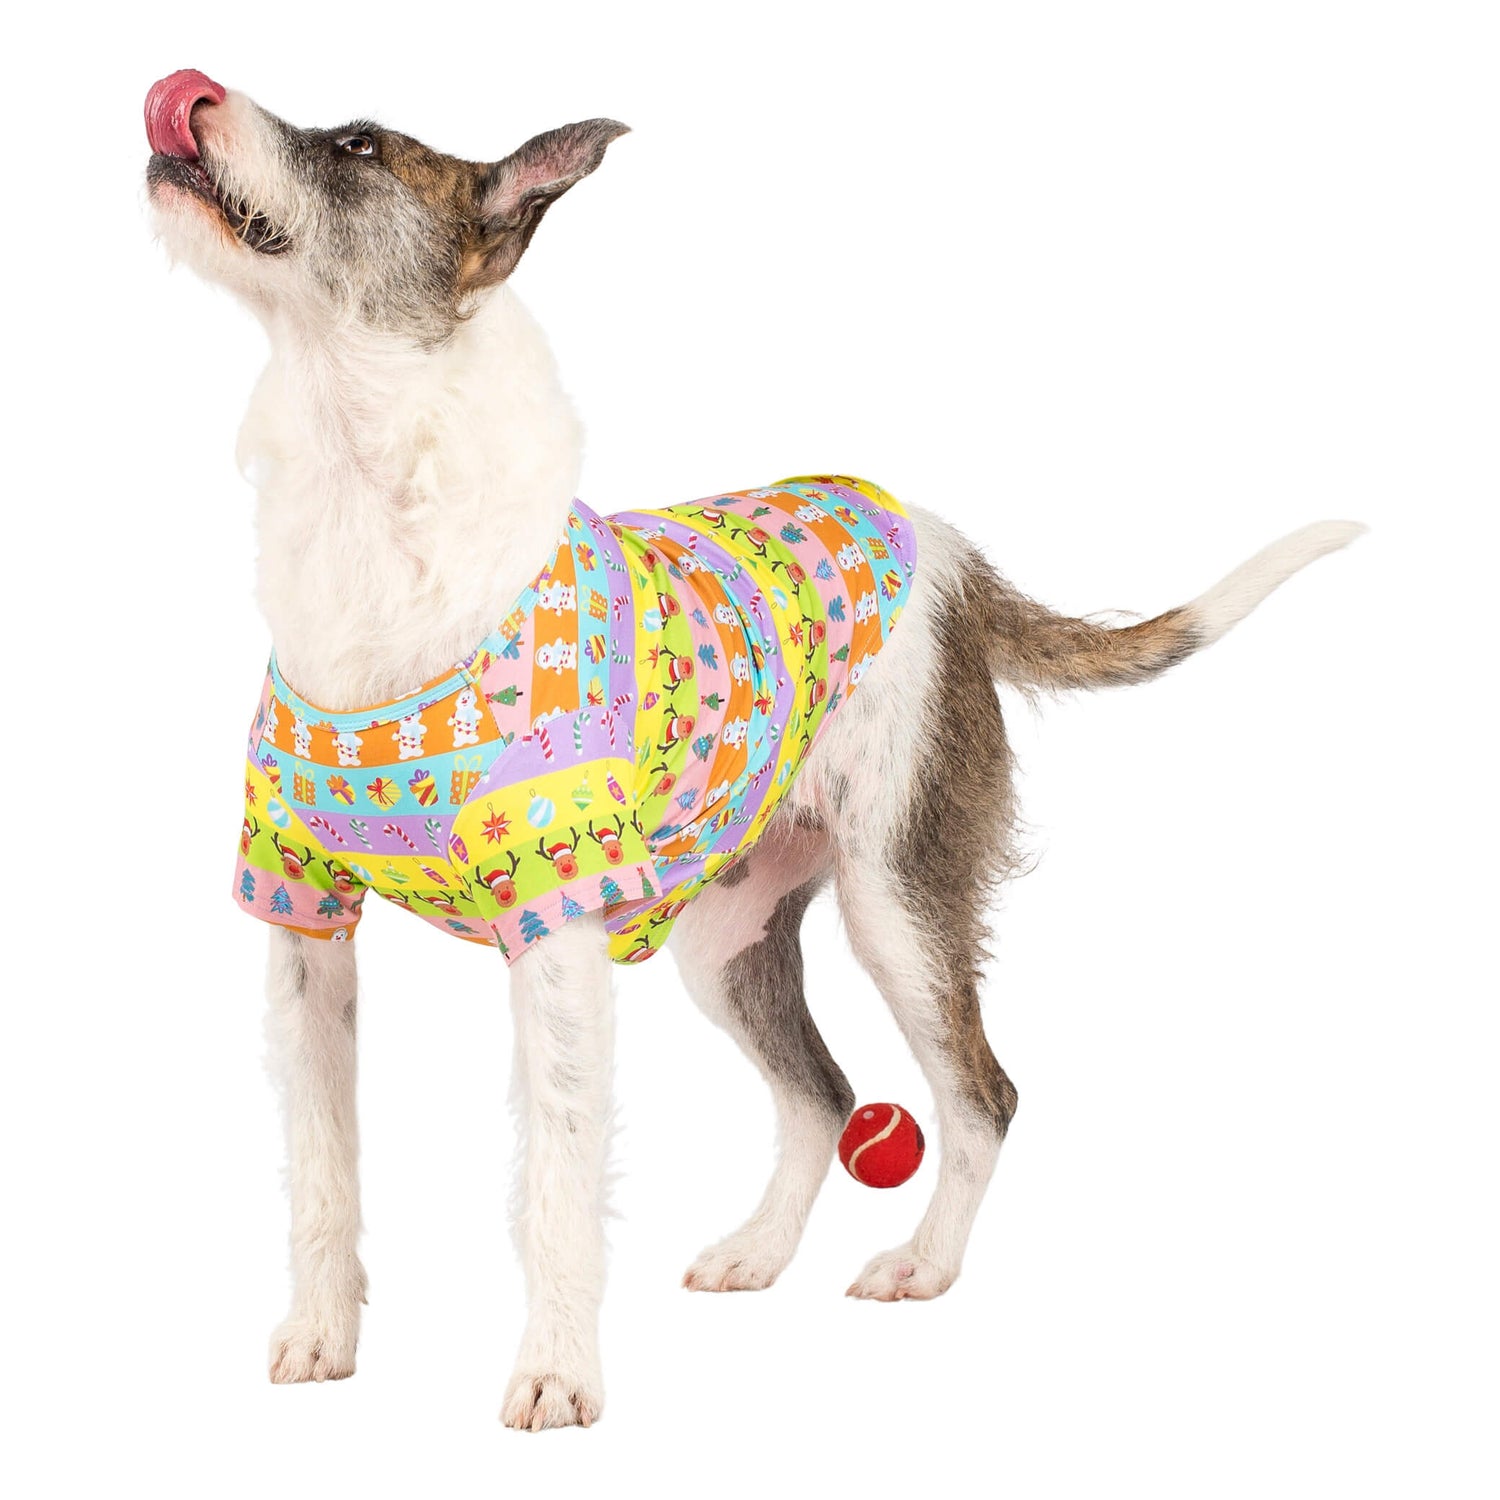 An Irish Wolfhound wearing VIbrant Hound's Electric Energy shirt for dogs. It is green, orange, pink, and purple stripes with reindeer, christmas trees, snowmen and christmas decorations printed on it.